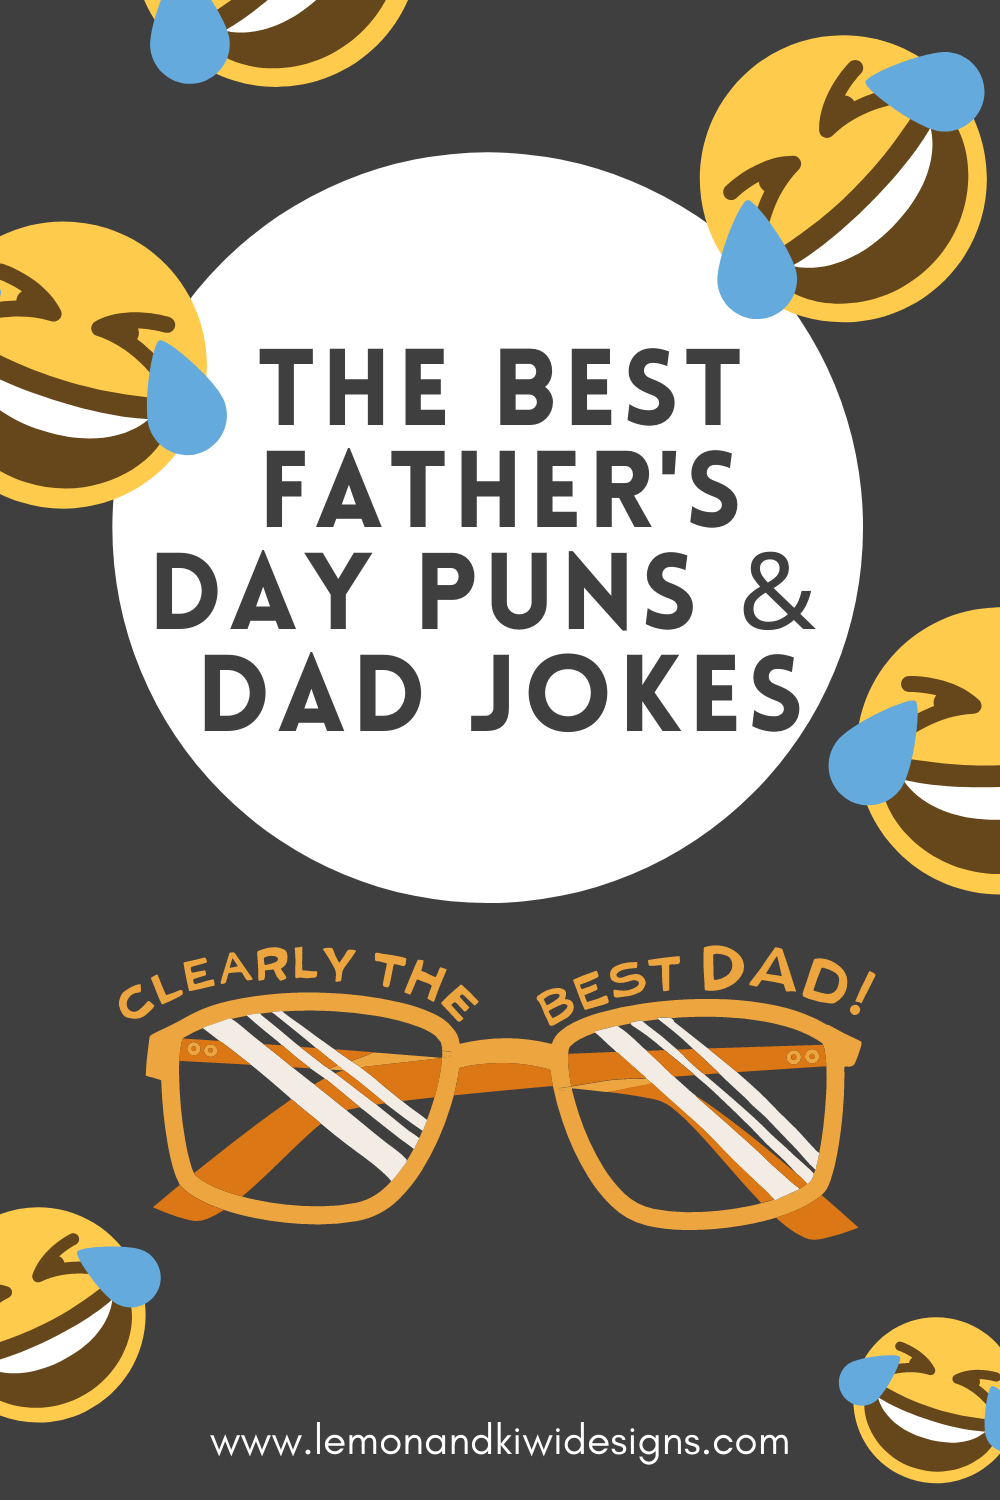 45 Hilarious Dad Jokes for Father’s Day Lemon and Kiwi Designs